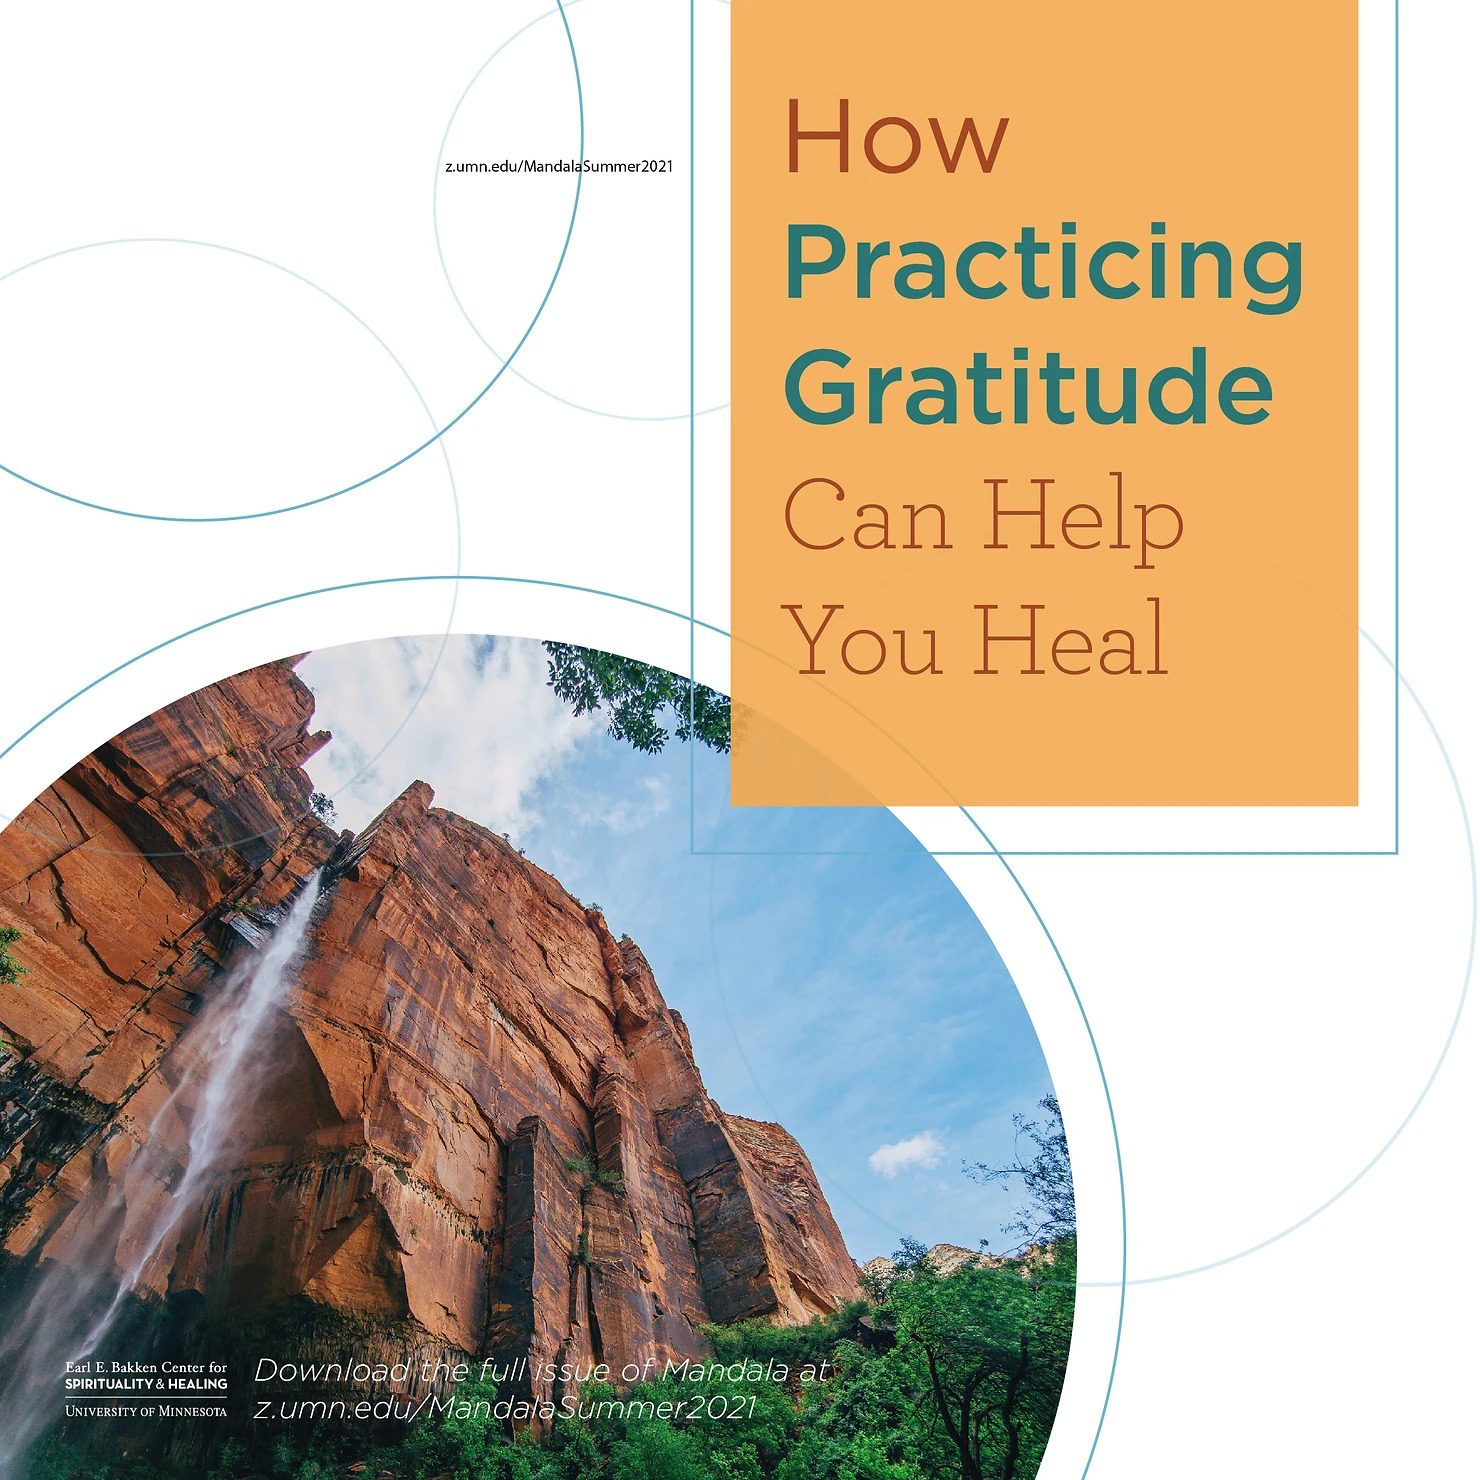 "how practicing gratitude can help you heal" text with a mountain in the background